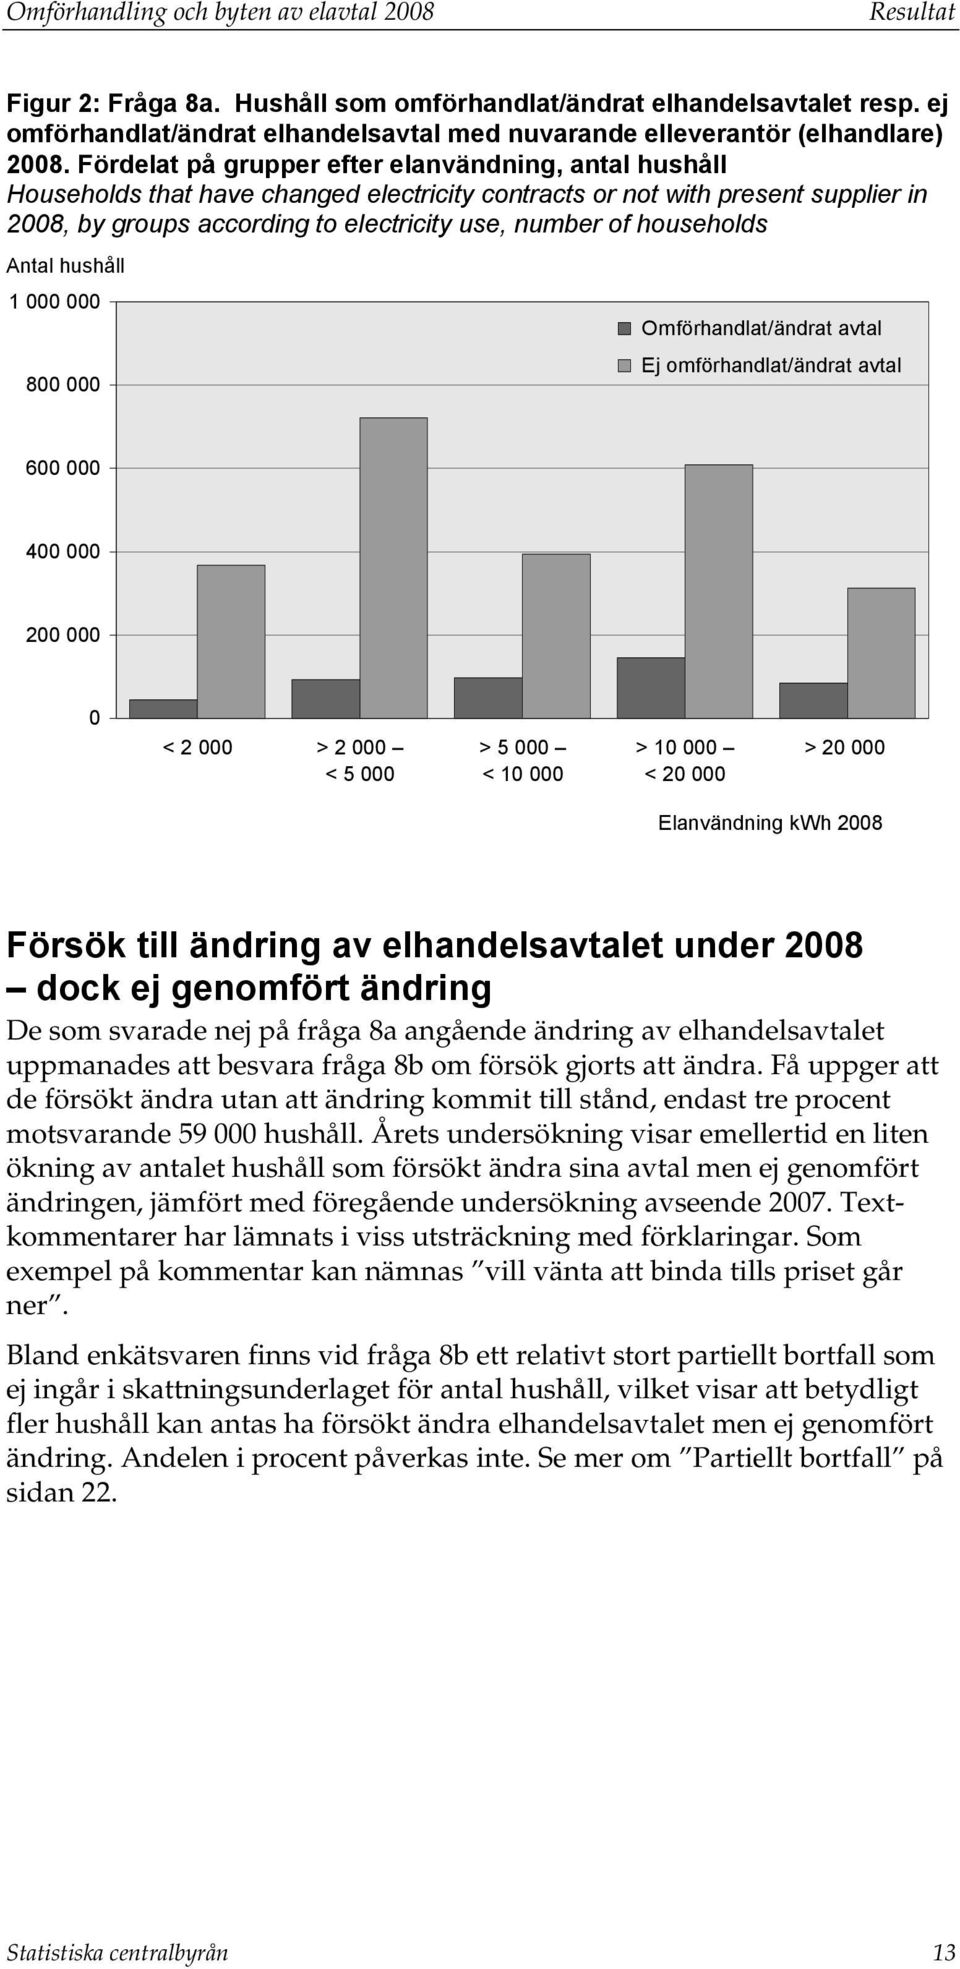 Fördelat på grupper efter elanvändning, antal hushåll Households that have changed electricity contracts or not with present supplier in 2008, by groups according to electricity use, number of